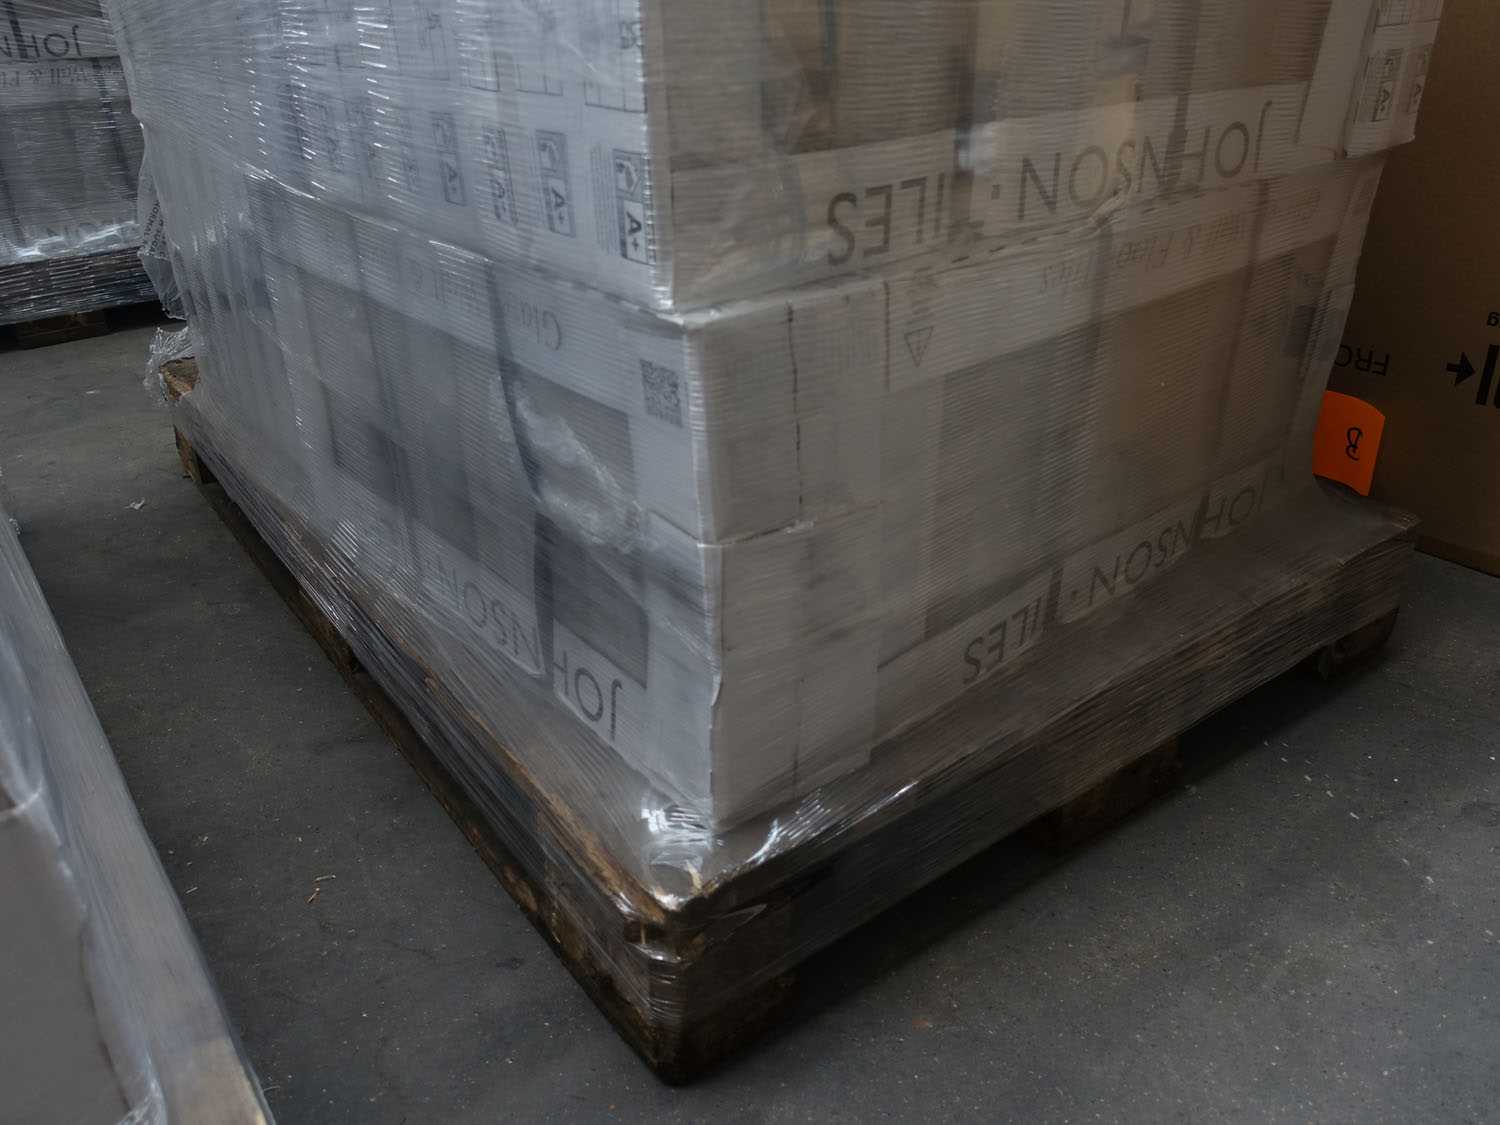 Lot 62 - 20 cartons of Johnson Tiles HAVE3A Haven Slate...